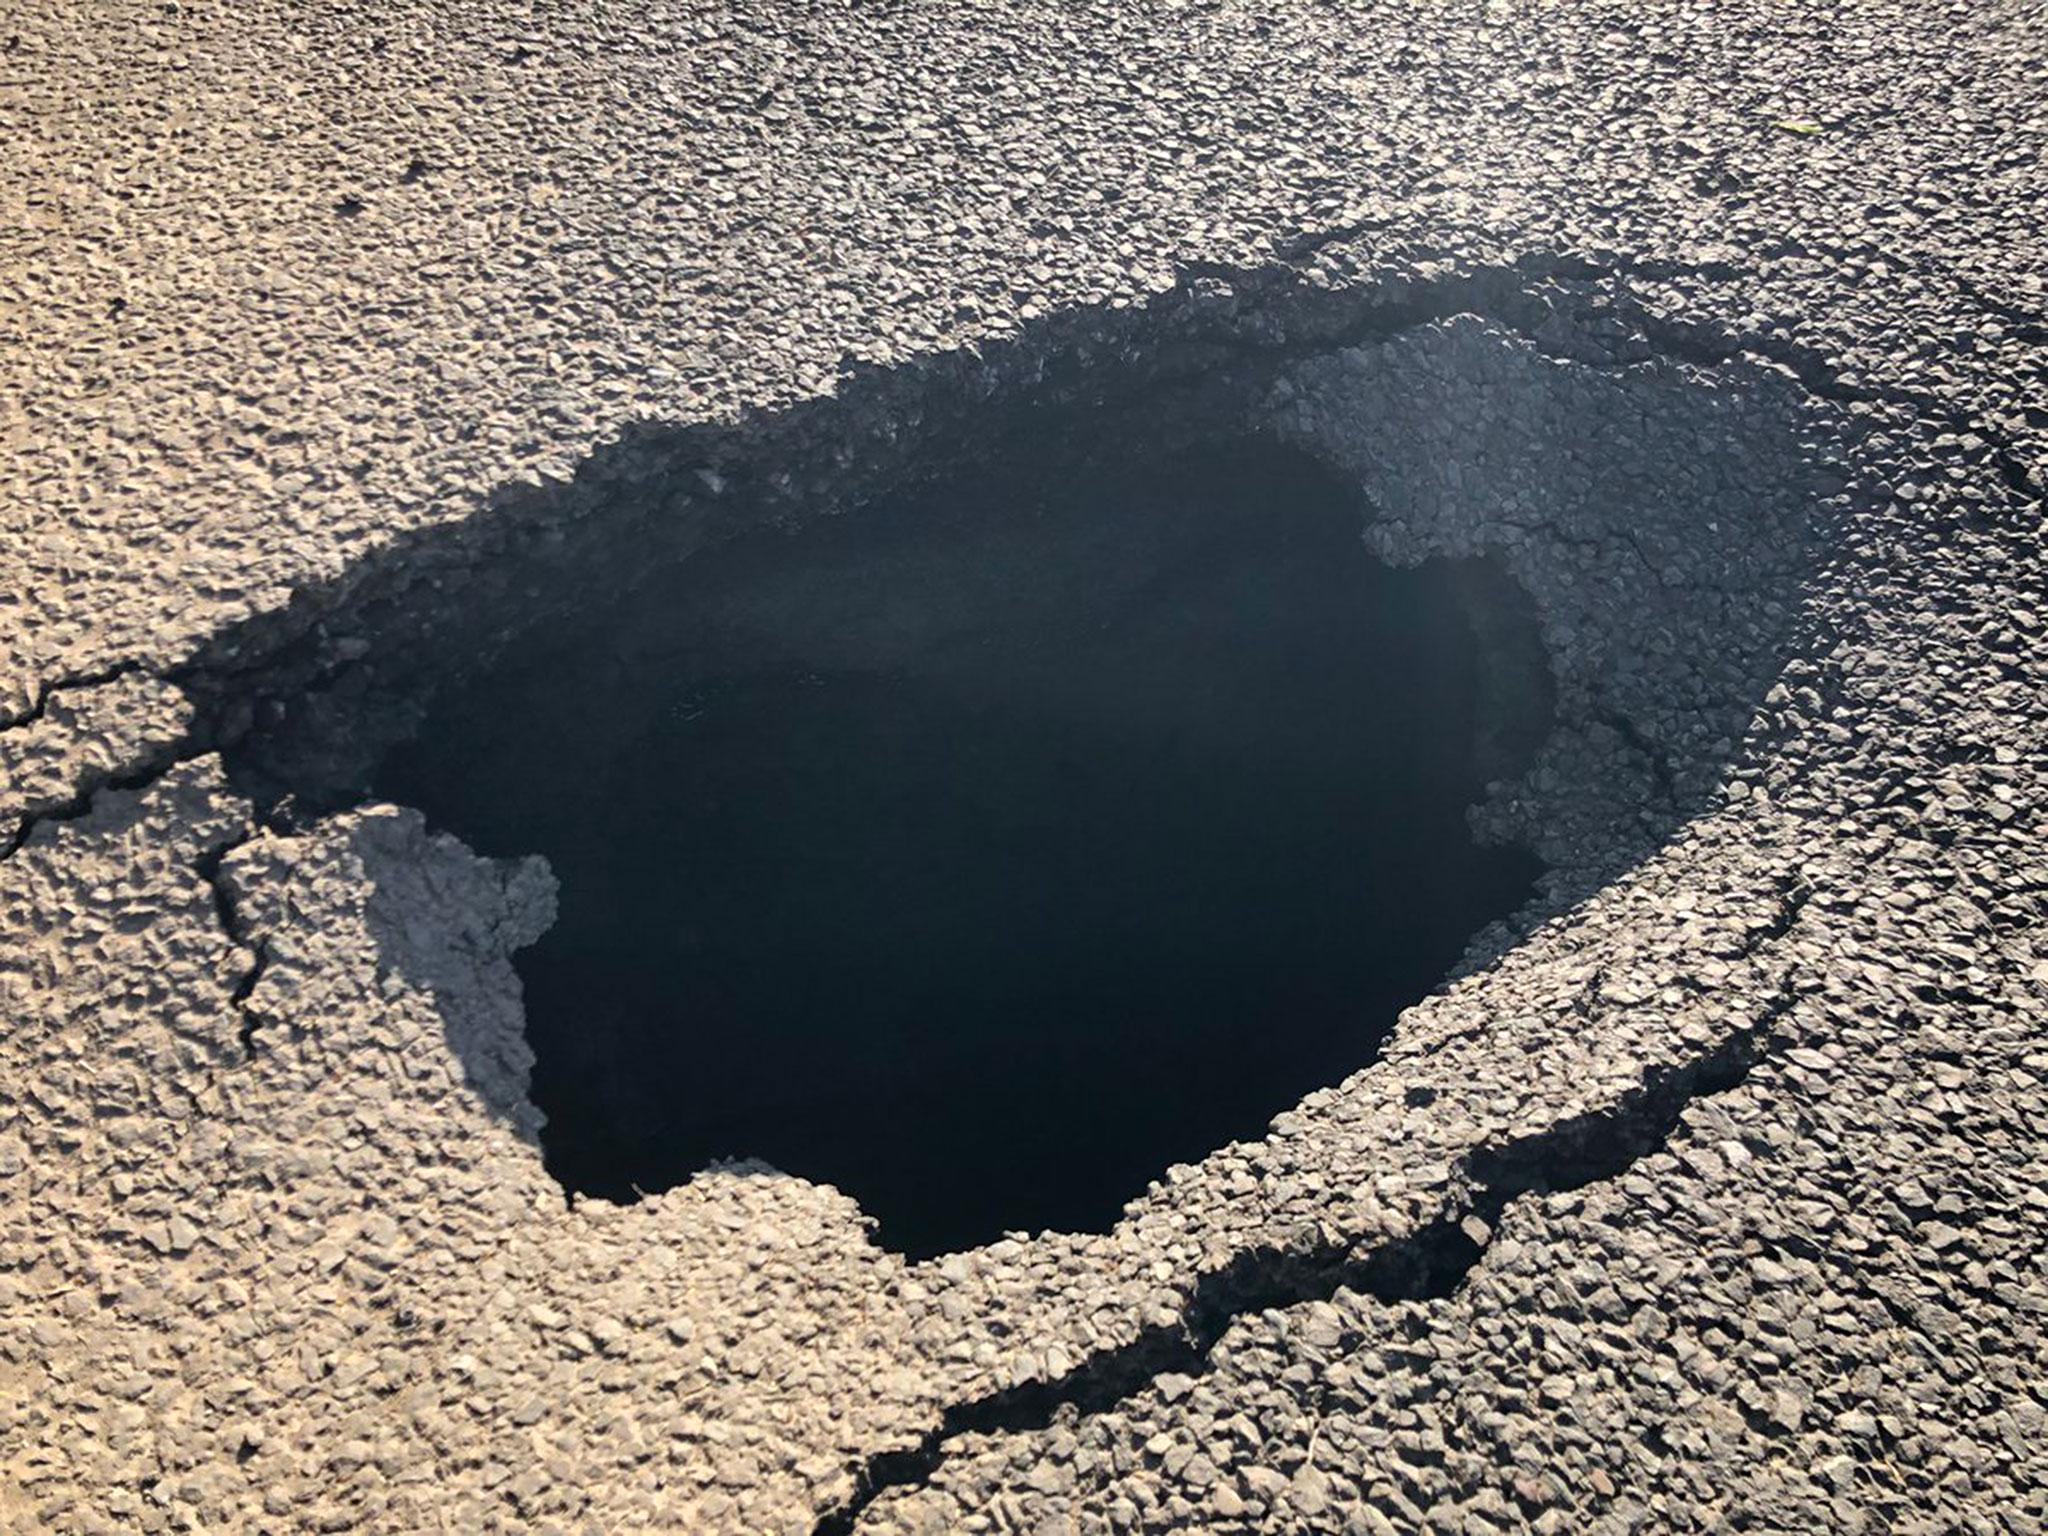 Sinkhole opens up in middle of A40 in Wales, causing it to close in both directions